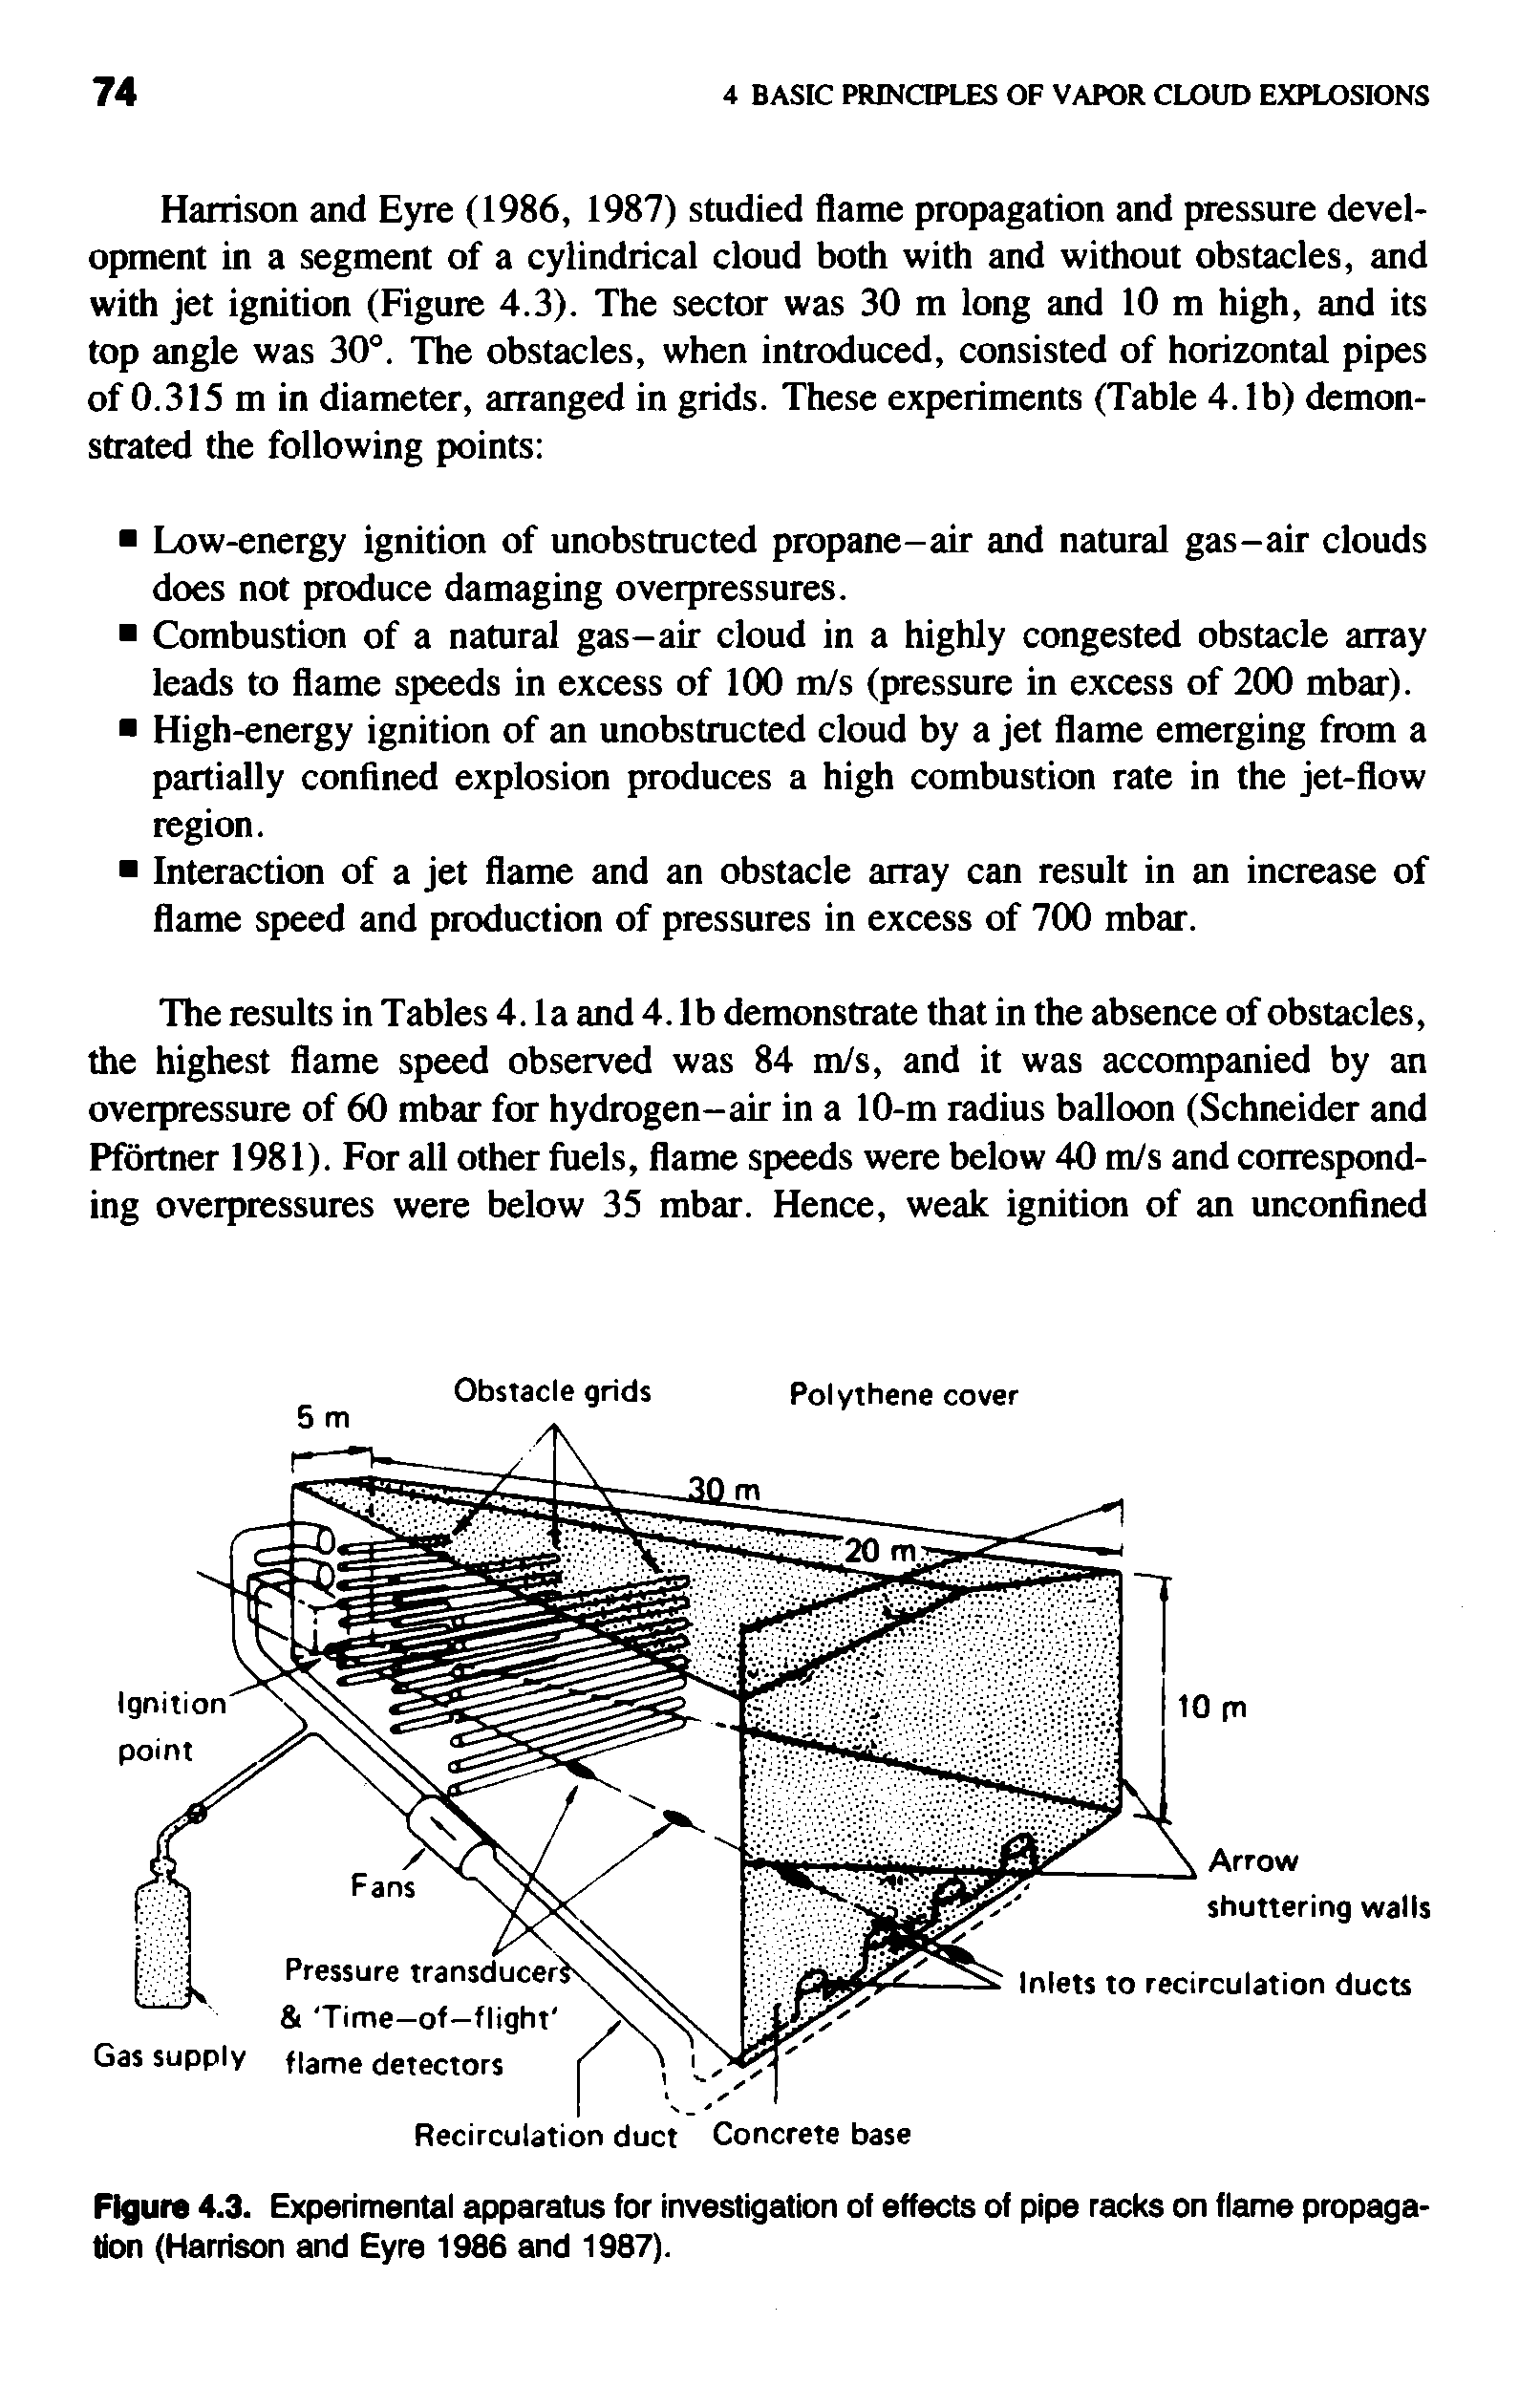 Figure 4.3. Experimental apparatus for investigation of effects of pipe racks on flame propagation (Harrison and Eyre 1986 and 1987).